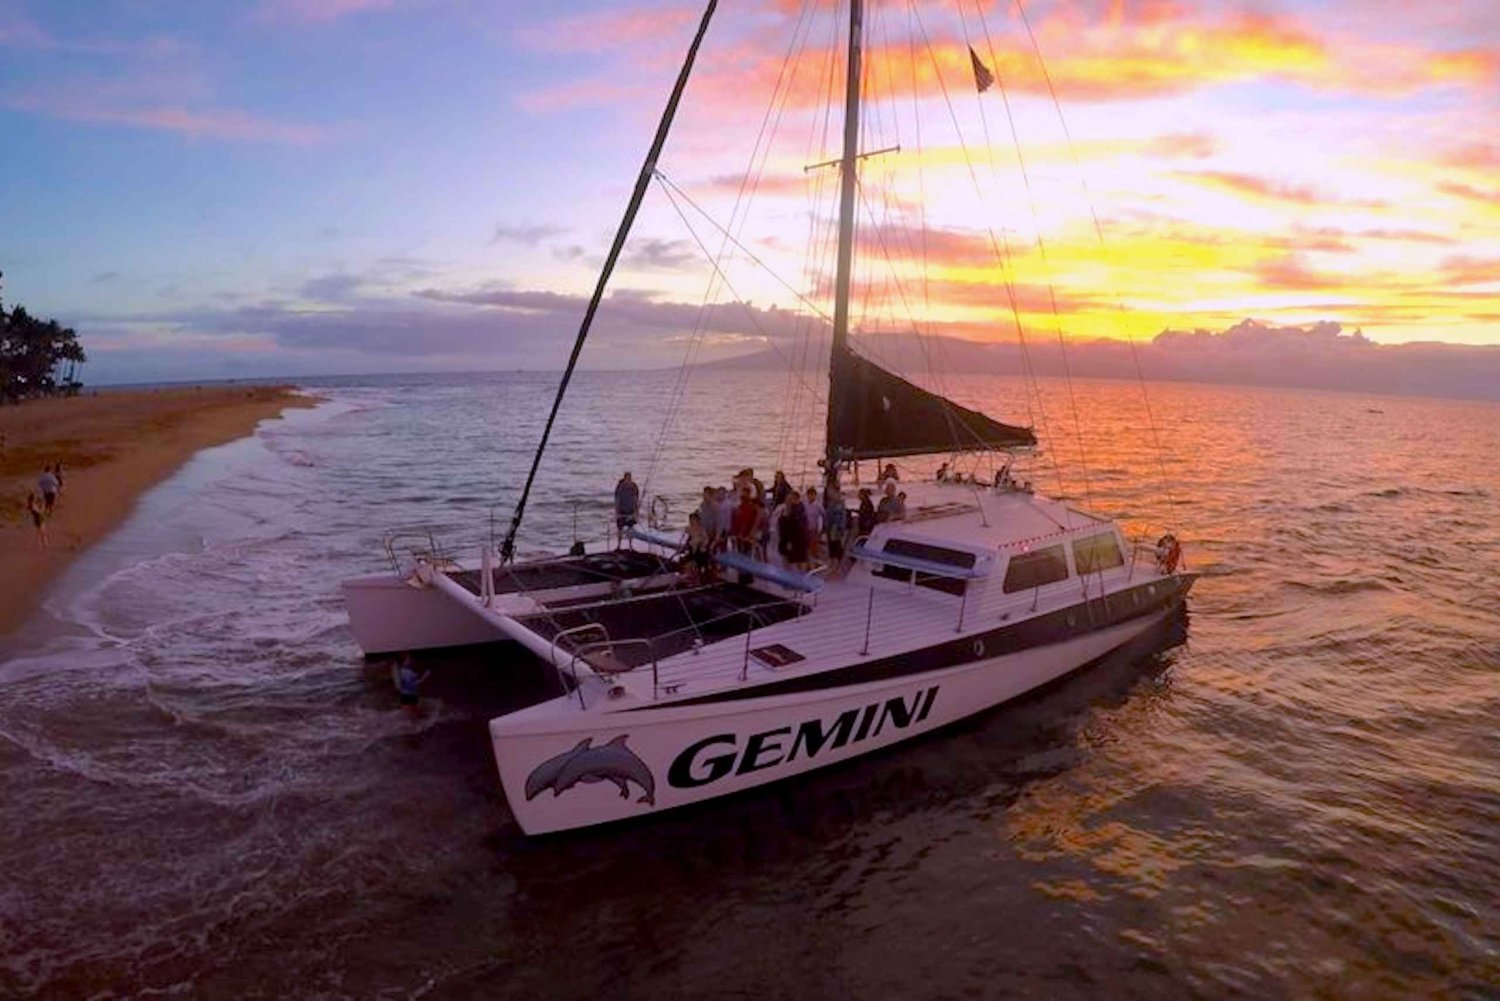 Maui: 2 Hour Sunset Sail with Open Bar and Appetizers